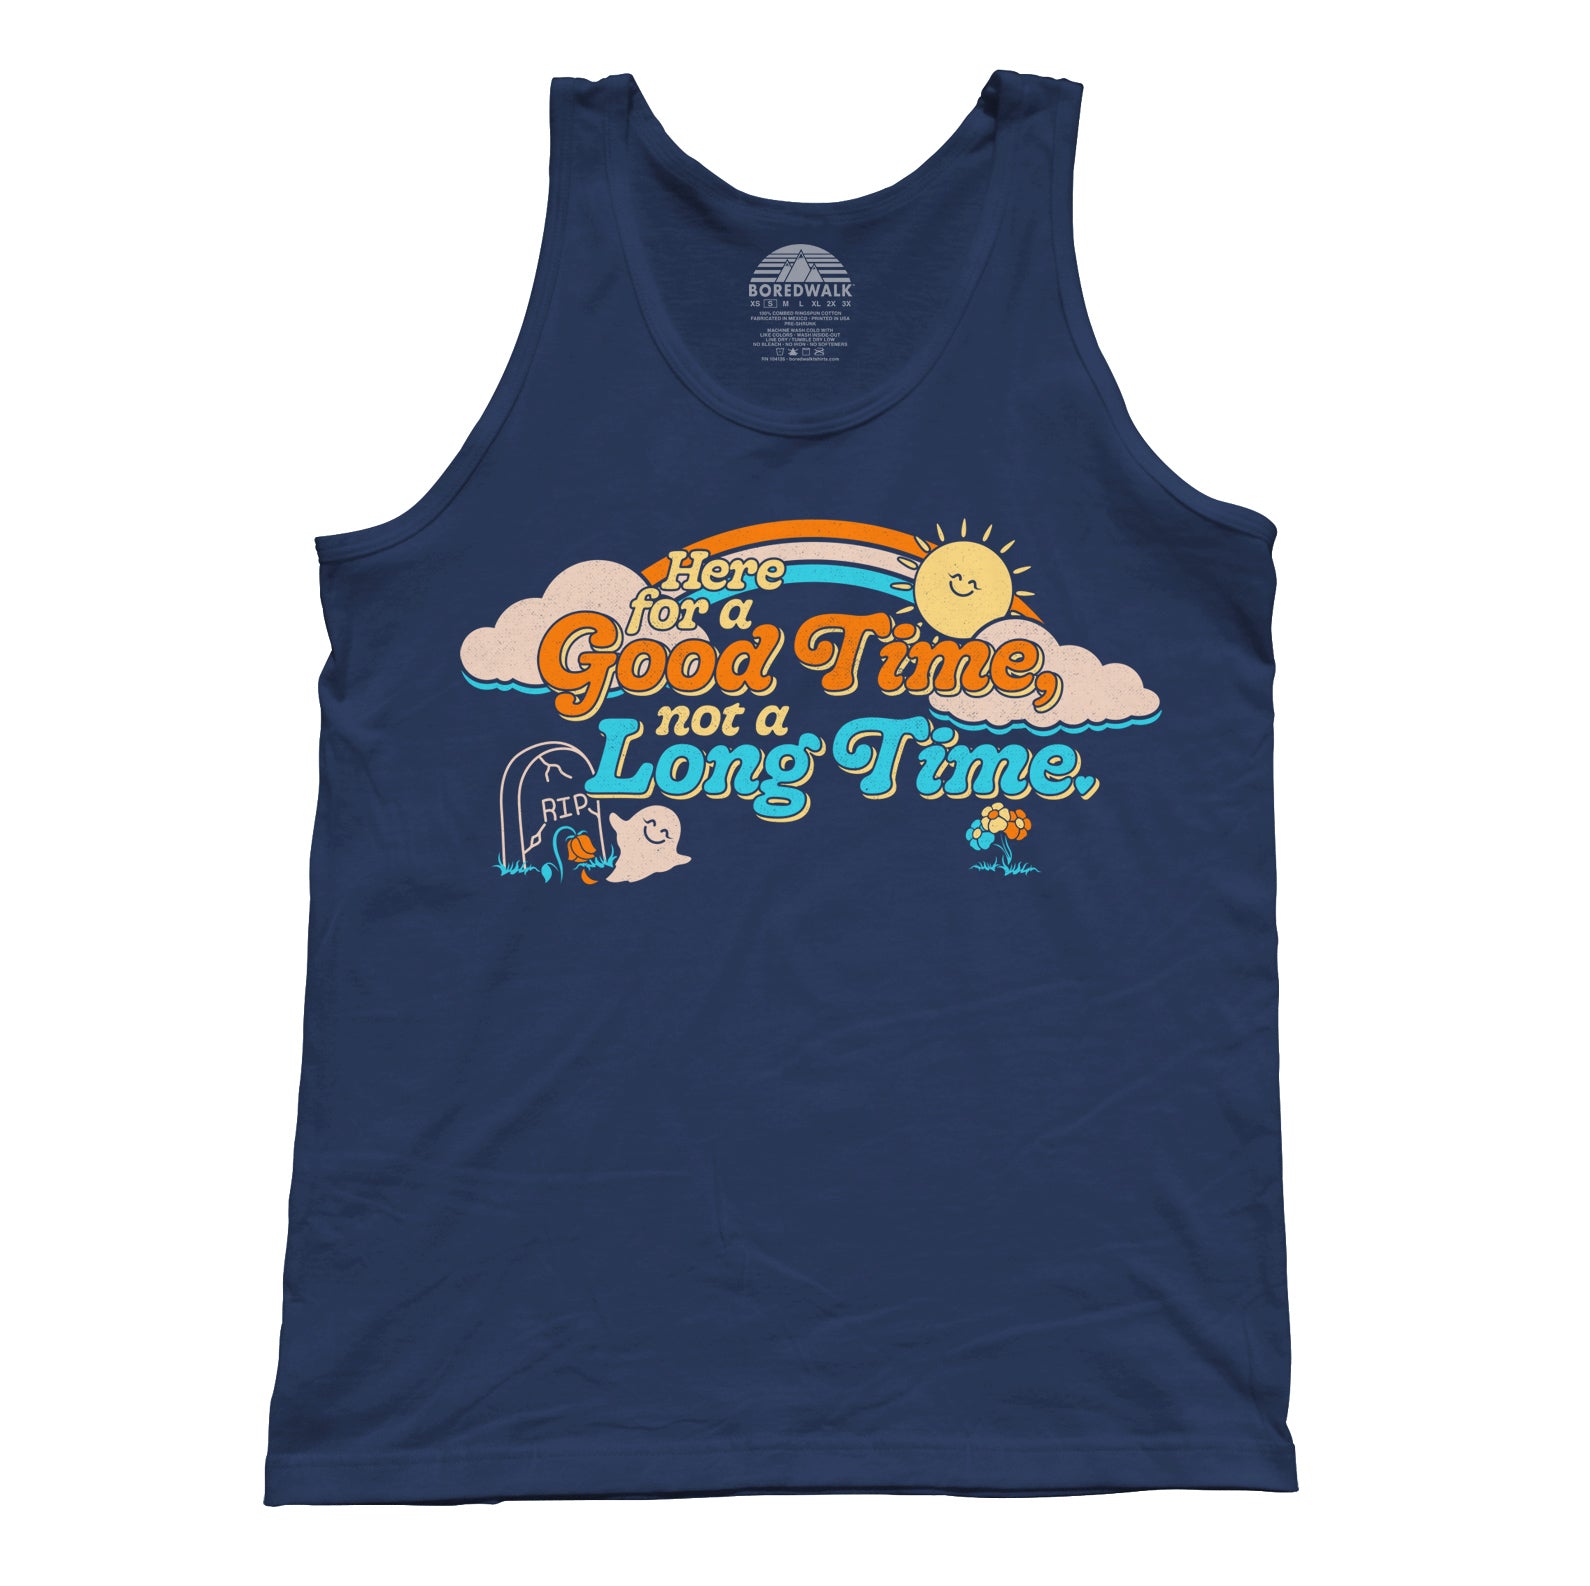 Unisex Here for a Good Time Not a Long Time Tank Top